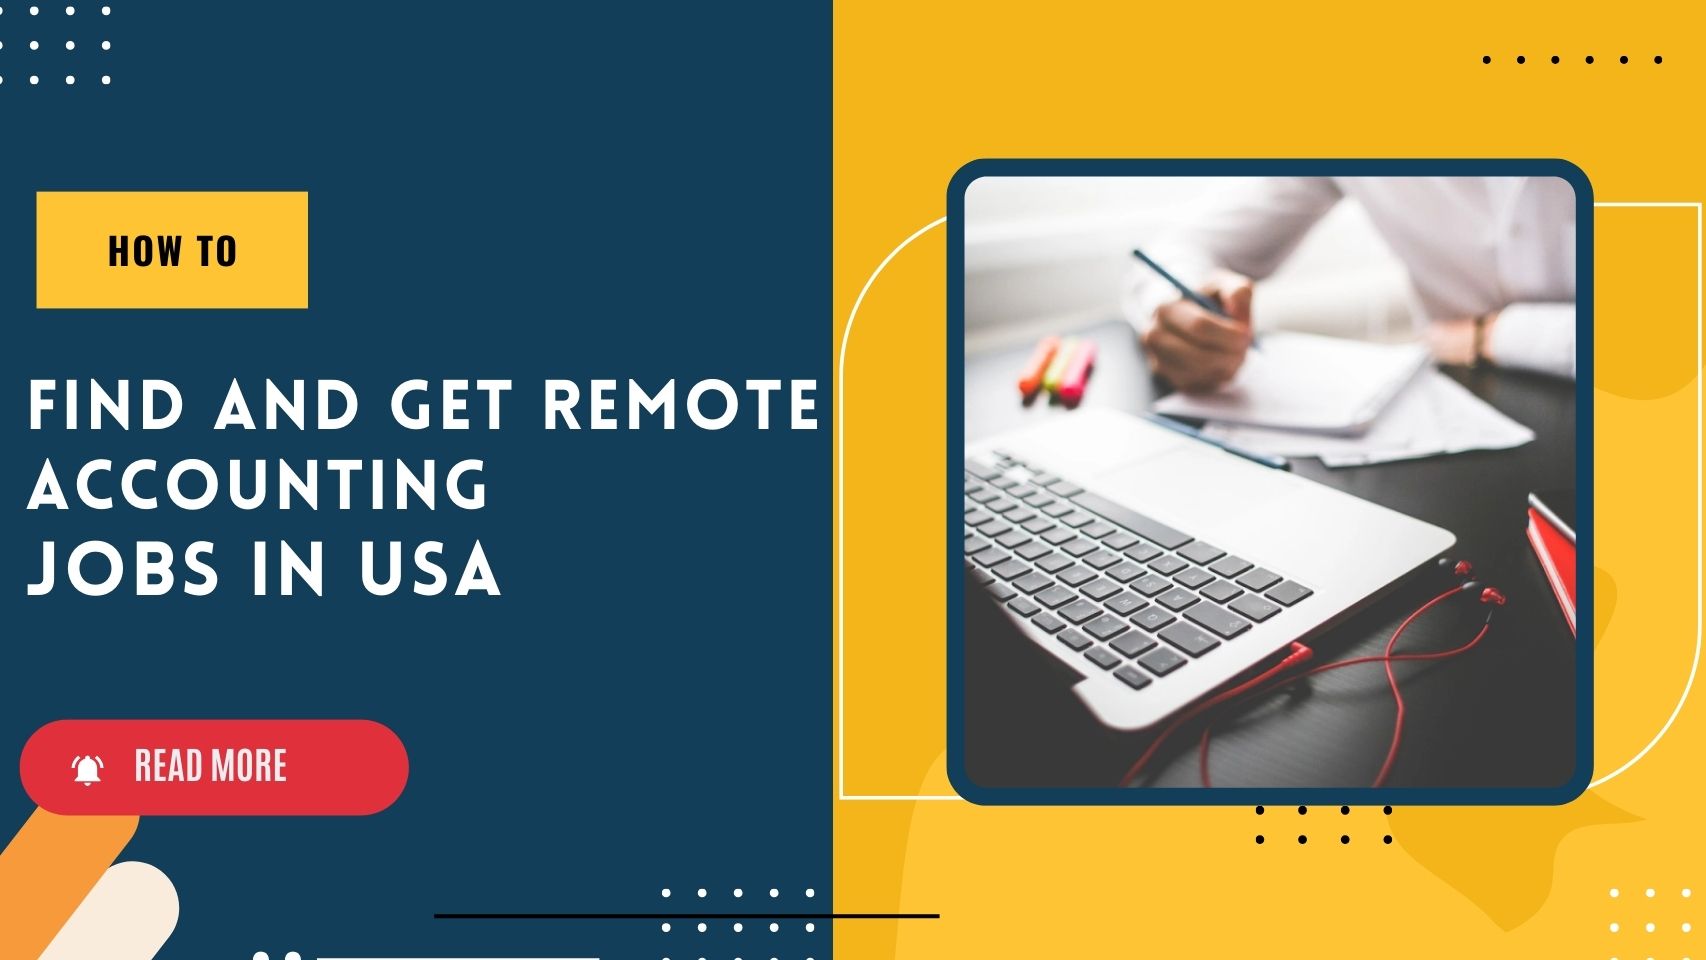 How to Find and Get Remote Accounting Jobs in USA